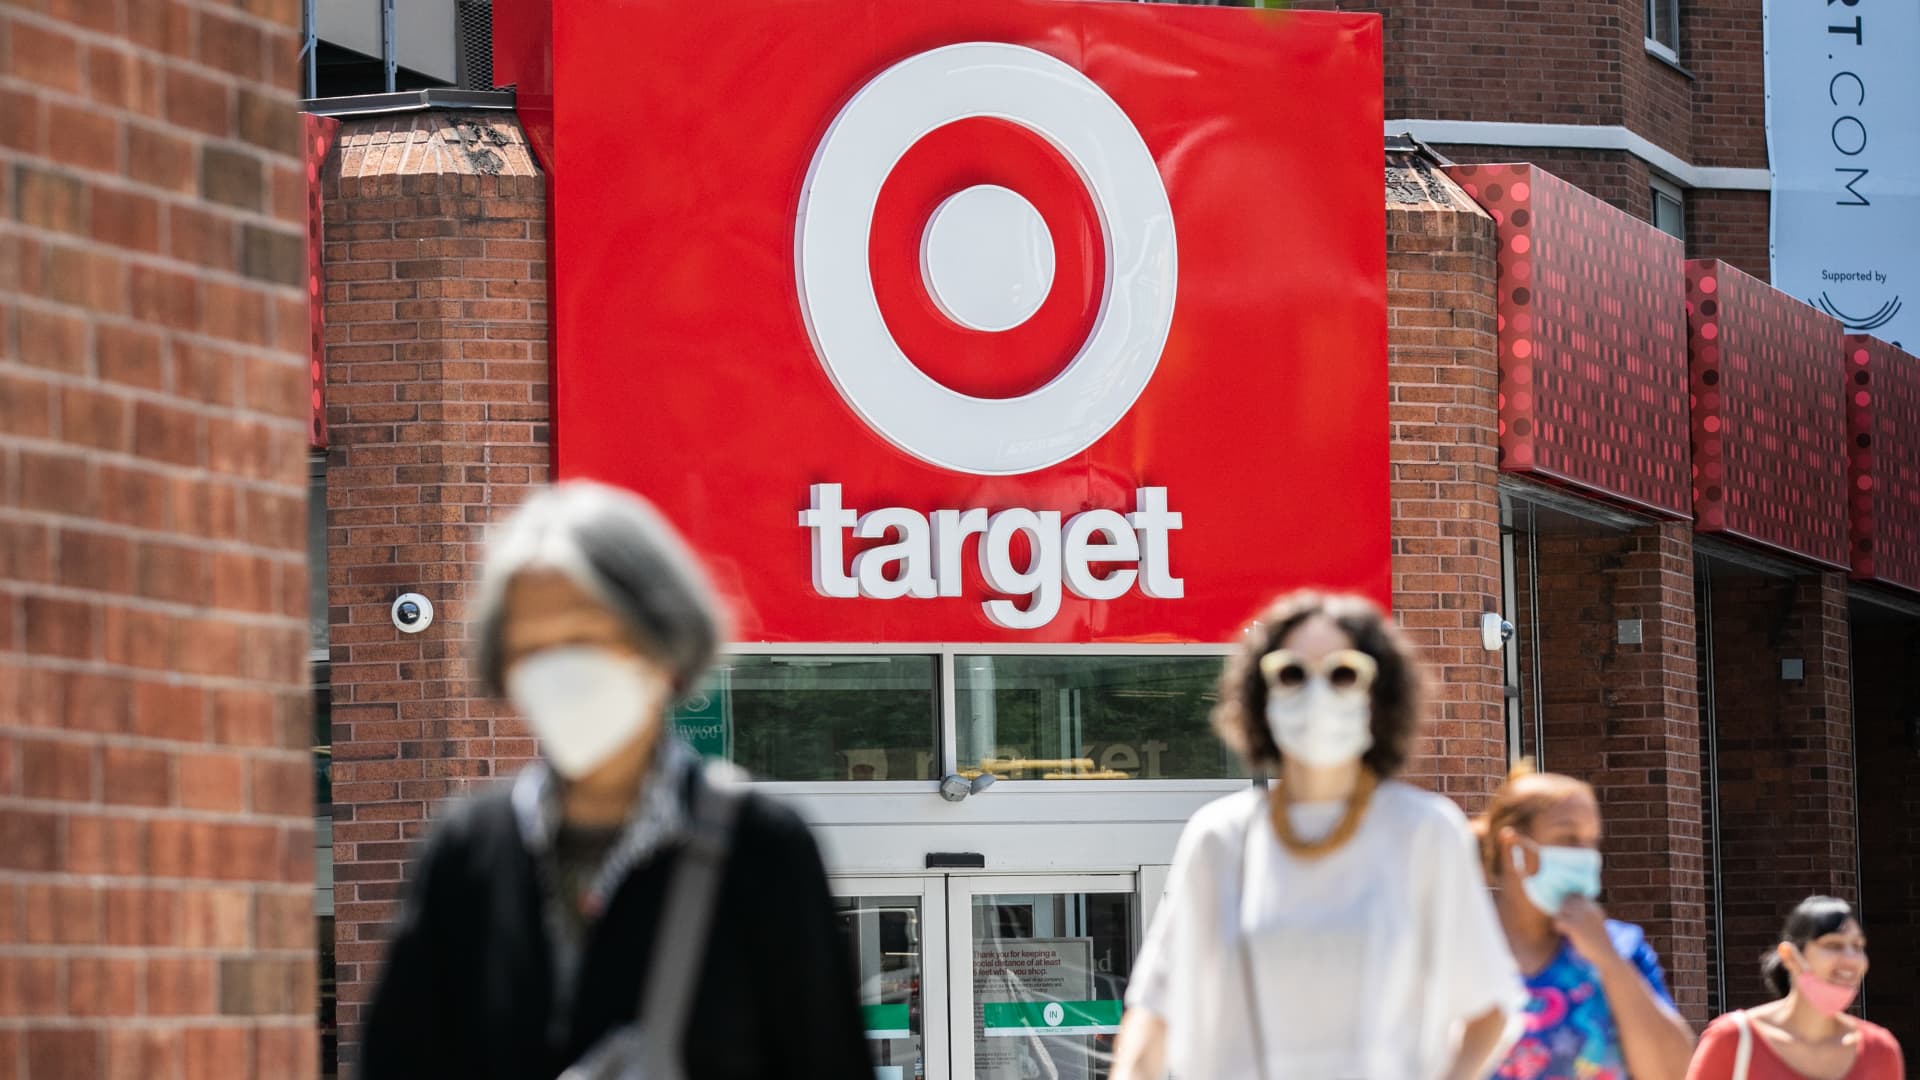 Pedestrians wearing protective masks walk past a Target store in New York, on Monday, Aug. 17, 2020.